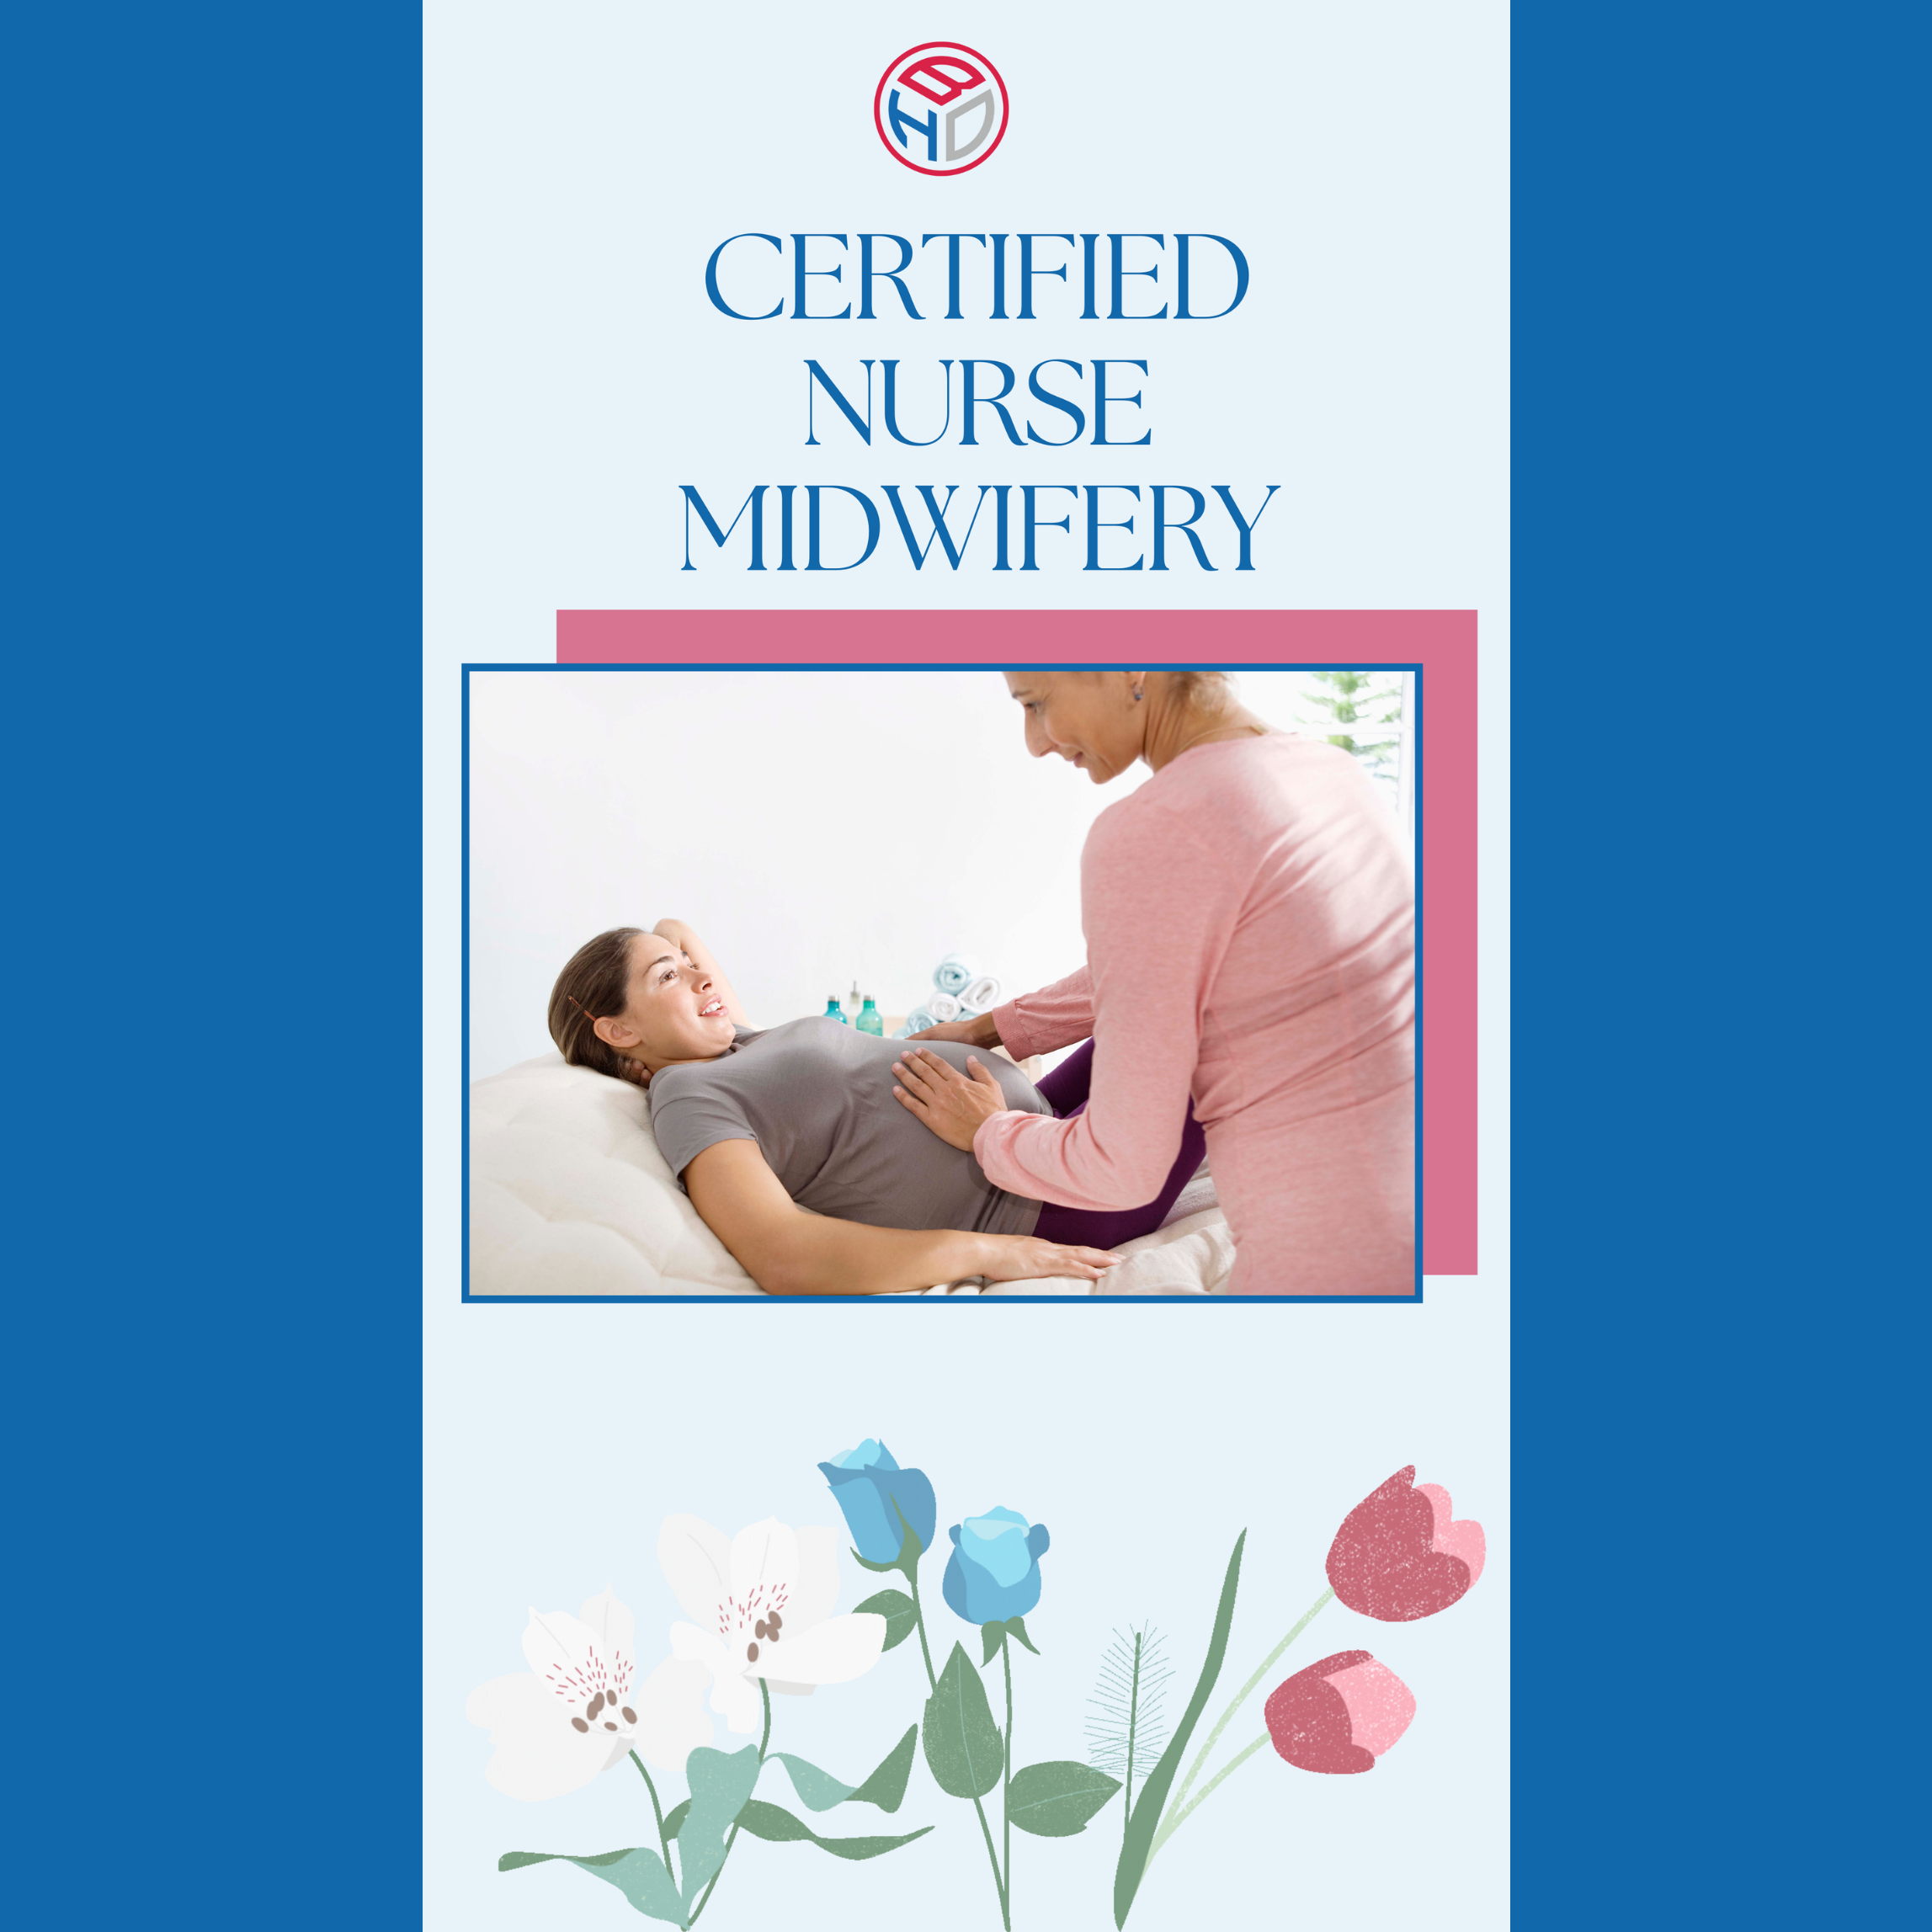 How Do You Become a Certified Nurse Midwife?